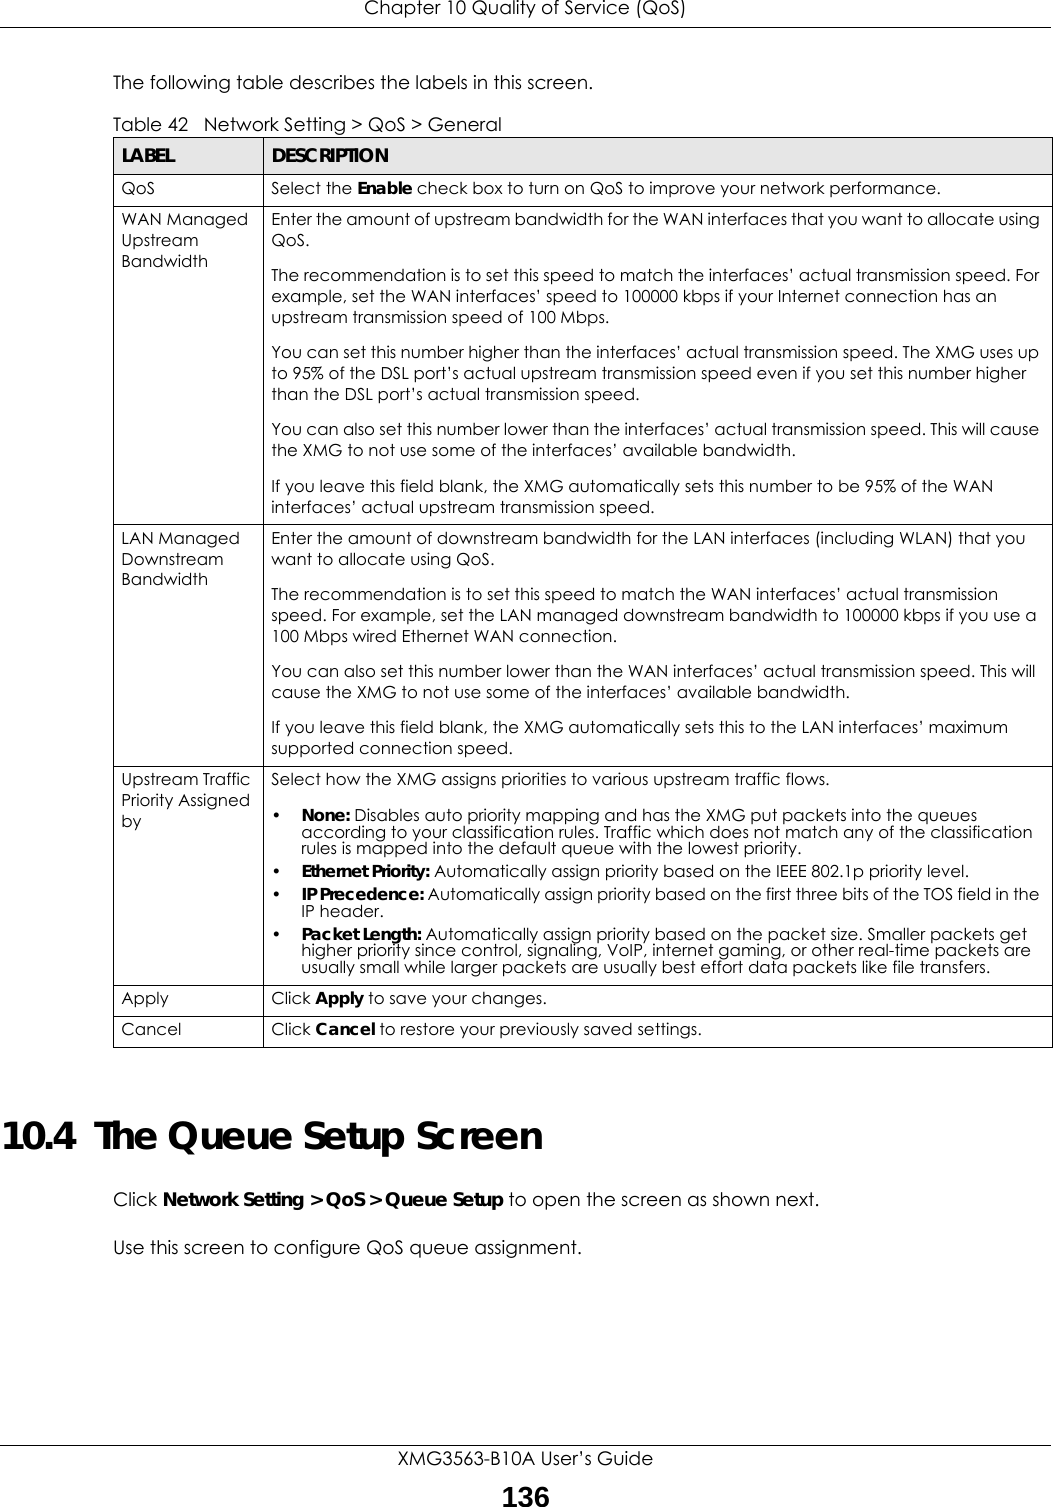 Chapter 10 Quality of Service (QoS)XMG3563-B10A User’s Guide136The following table describes the labels in this screen. 10.4  The Queue Setup ScreenClick Network Setting &gt; QoS &gt; Queue Setup to open the screen as shown next. Use this screen to configure QoS queue assignment. Table 42   Network Setting &gt; QoS &gt; GeneralLABEL DESCRIPTIONQoS Select the Enable check box to turn on QoS to improve your network performance. WAN Managed Upstream Bandwidth Enter the amount of upstream bandwidth for the WAN interfaces that you want to allocate using QoS. The recommendation is to set this speed to match the interfaces’ actual transmission speed. For example, set the WAN interfaces’ speed to 100000 kbps if your Internet connection has an upstream transmission speed of 100 Mbps.        You can set this number higher than the interfaces’ actual transmission speed. The XMG uses up to 95% of the DSL port’s actual upstream transmission speed even if you set this number higher than the DSL port’s actual transmission speed.You can also set this number lower than the interfaces’ actual transmission speed. This will cause the XMG to not use some of the interfaces’ available bandwidth.If you leave this field blank, the XMG automatically sets this number to be 95% of the WAN interfaces’ actual upstream transmission speed.LAN Managed Downstream Bandwidth Enter the amount of downstream bandwidth for the LAN interfaces (including WLAN) that you want to allocate using QoS. The recommendation is to set this speed to match the WAN interfaces’ actual transmission speed. For example, set the LAN managed downstream bandwidth to 100000 kbps if you use a 100 Mbps wired Ethernet WAN connection.        You can also set this number lower than the WAN interfaces’ actual transmission speed. This will cause the XMG to not use some of the interfaces’ available bandwidth.If you leave this field blank, the XMG automatically sets this to the LAN interfaces’ maximum supported connection speed.Upstream Traffic Priority Assigned bySelect how the XMG assigns priorities to various upstream traffic flows.•None: Disables auto priority mapping and has the XMG put packets into the queues according to your classification rules. Traffic which does not match any of the classification rules is mapped into the default queue with the lowest priority.•Ethernet Priority: Automatically assign priority based on the IEEE 802.1p priority level.•IP Precedence: Automatically assign priority based on the first three bits of the TOS field in the IP header.•Packet Length: Automatically assign priority based on the packet size. Smaller packets get higher priority since control, signaling, VoIP, internet gaming, or other real-time packets are usually small while larger packets are usually best effort data packets like file transfers.Apply Click Apply to save your changes.Cancel Click Cancel to restore your previously saved settings.